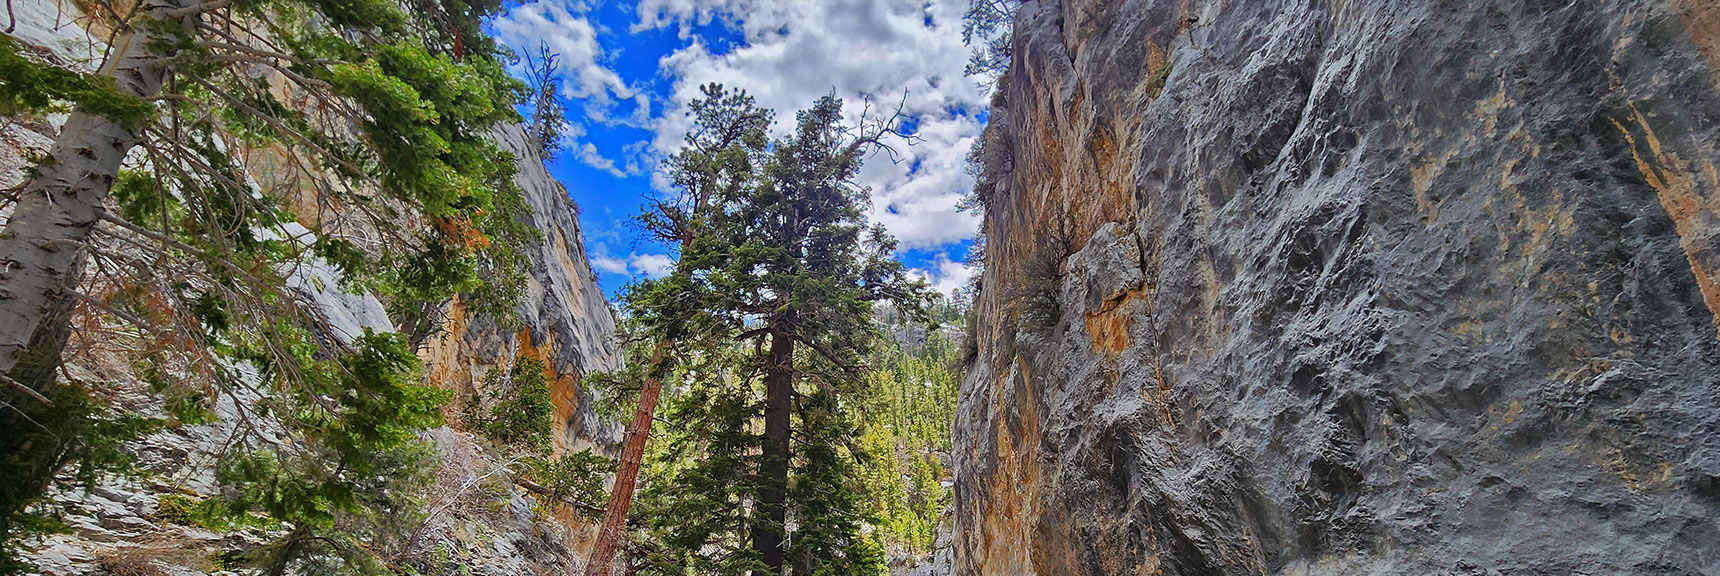 Incredible Sites Everywhere You Look | Fletcher Canyon Trail | Mt Charleston Wilderness | Spring Mountains, Nevada